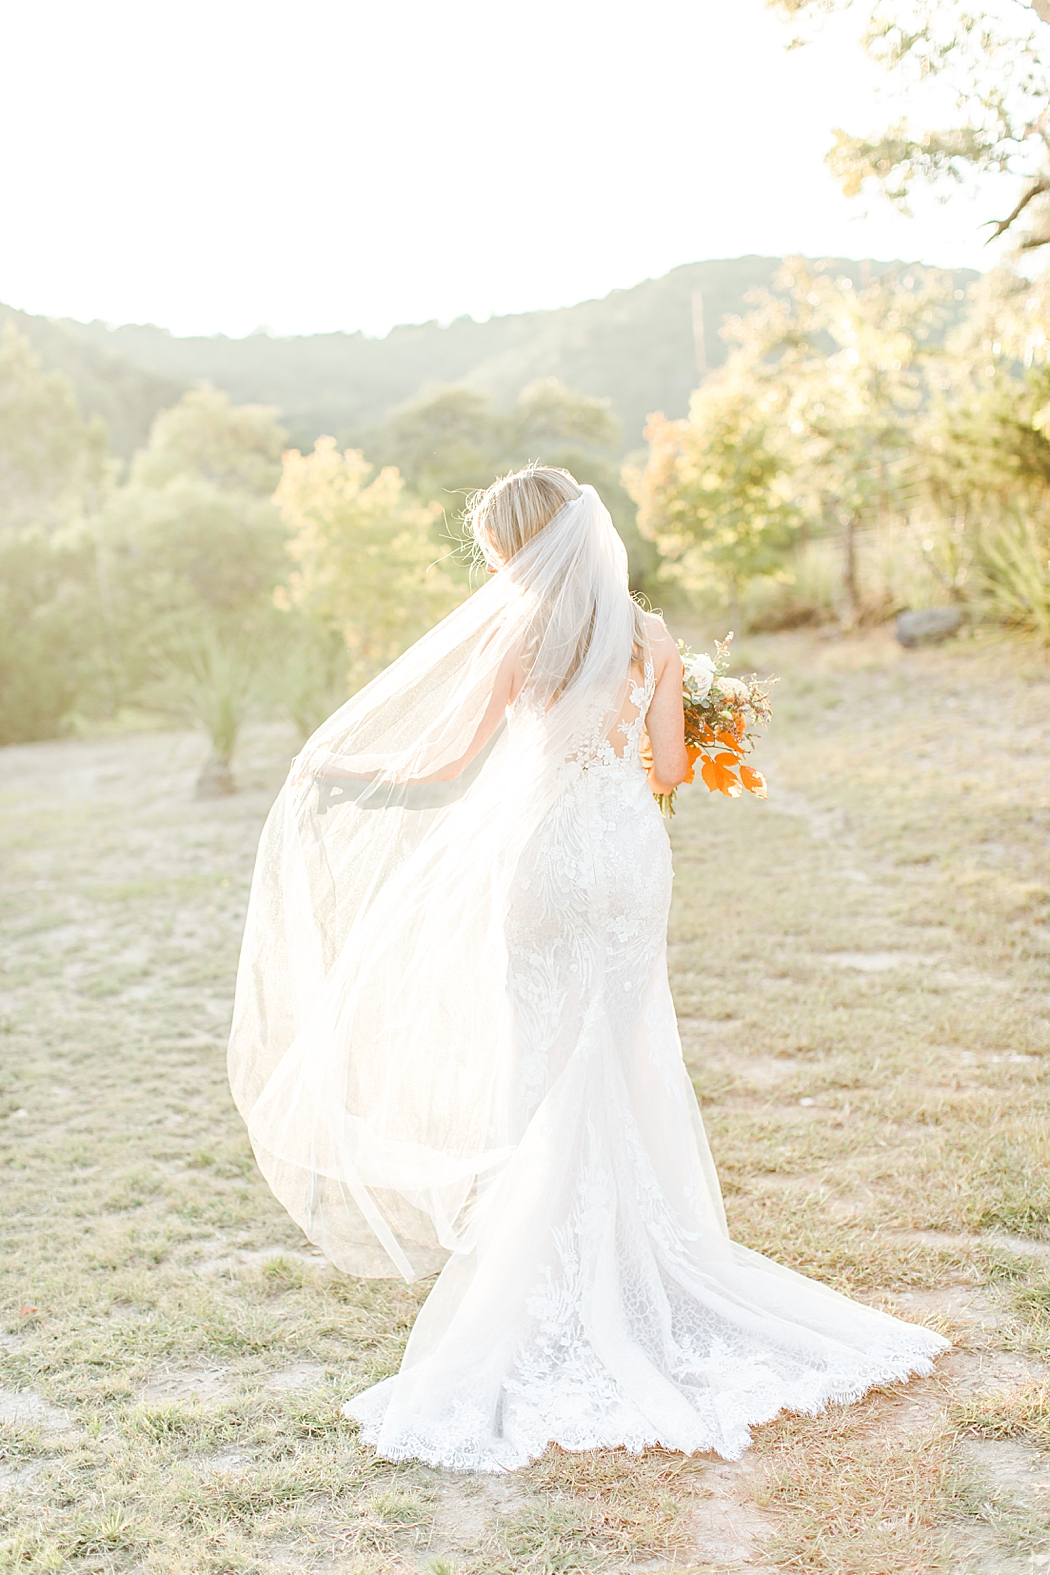 Terra Cotta Fall Micro Wedding in Kerrville Texas at a private estate in the Hill Country by Allison Jeffers Photography 0063